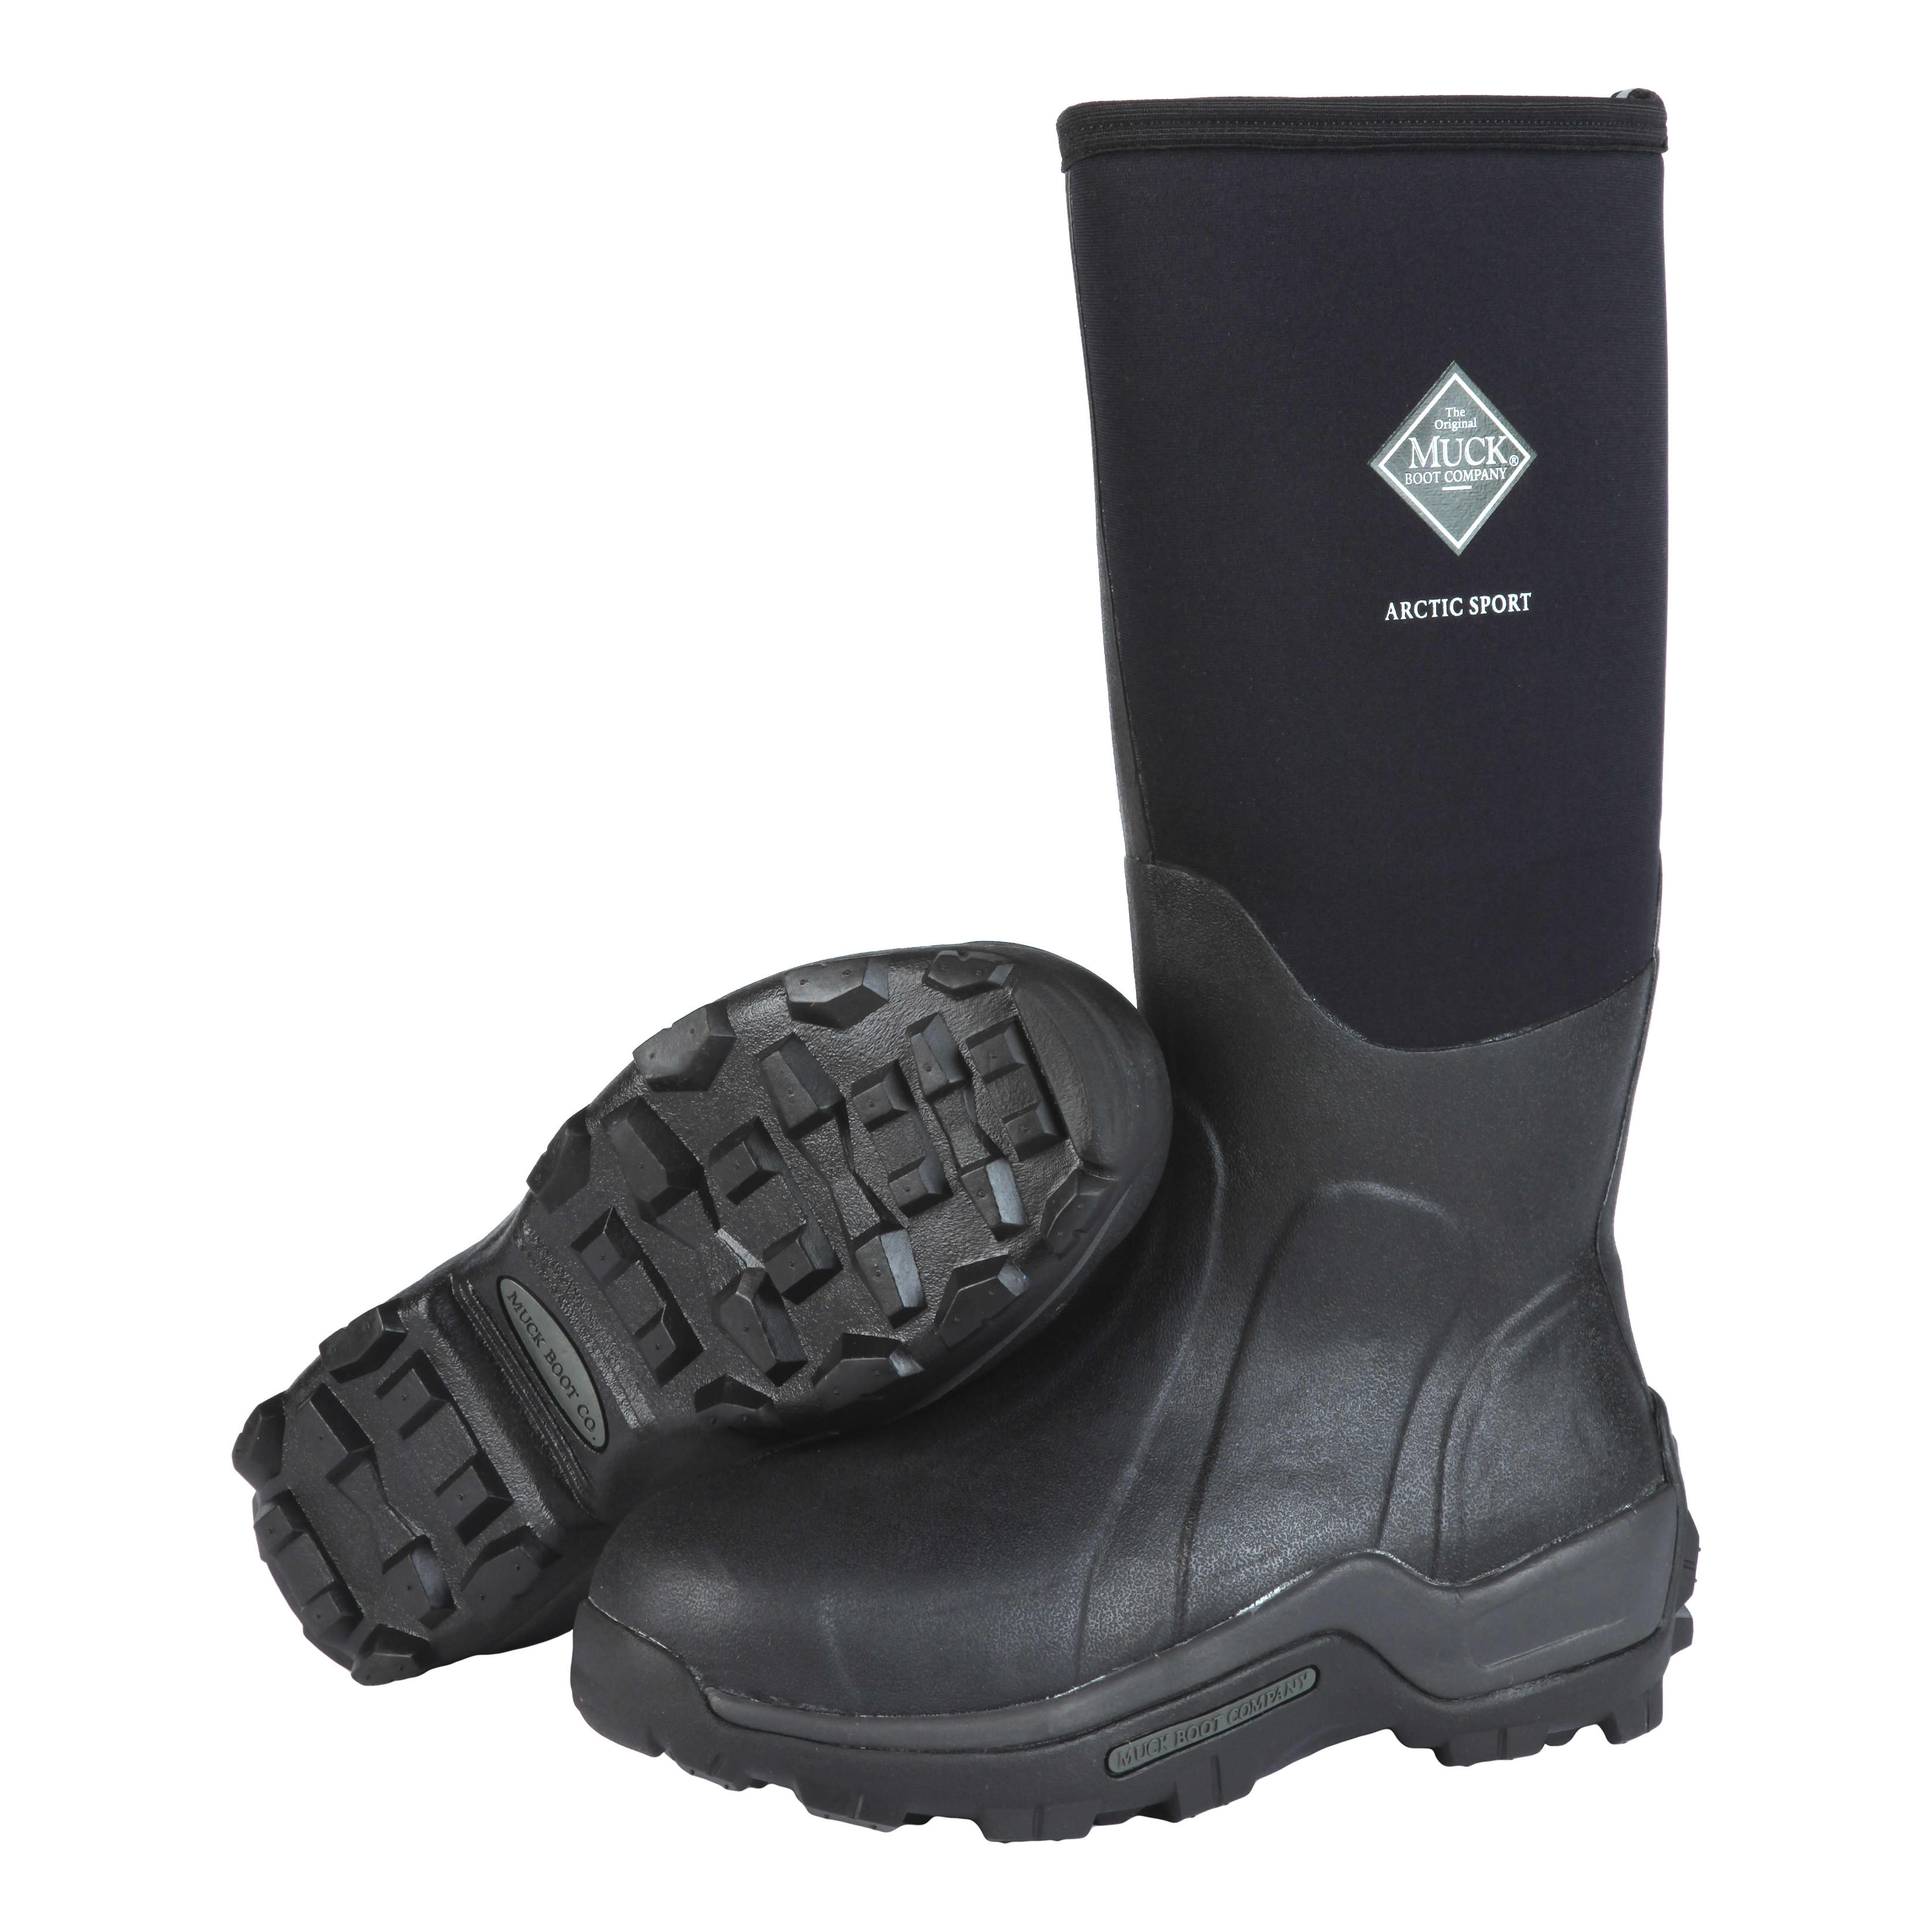 New Neoprene/Rubber Black Hunting Boots by Lake & Trail Muck Style